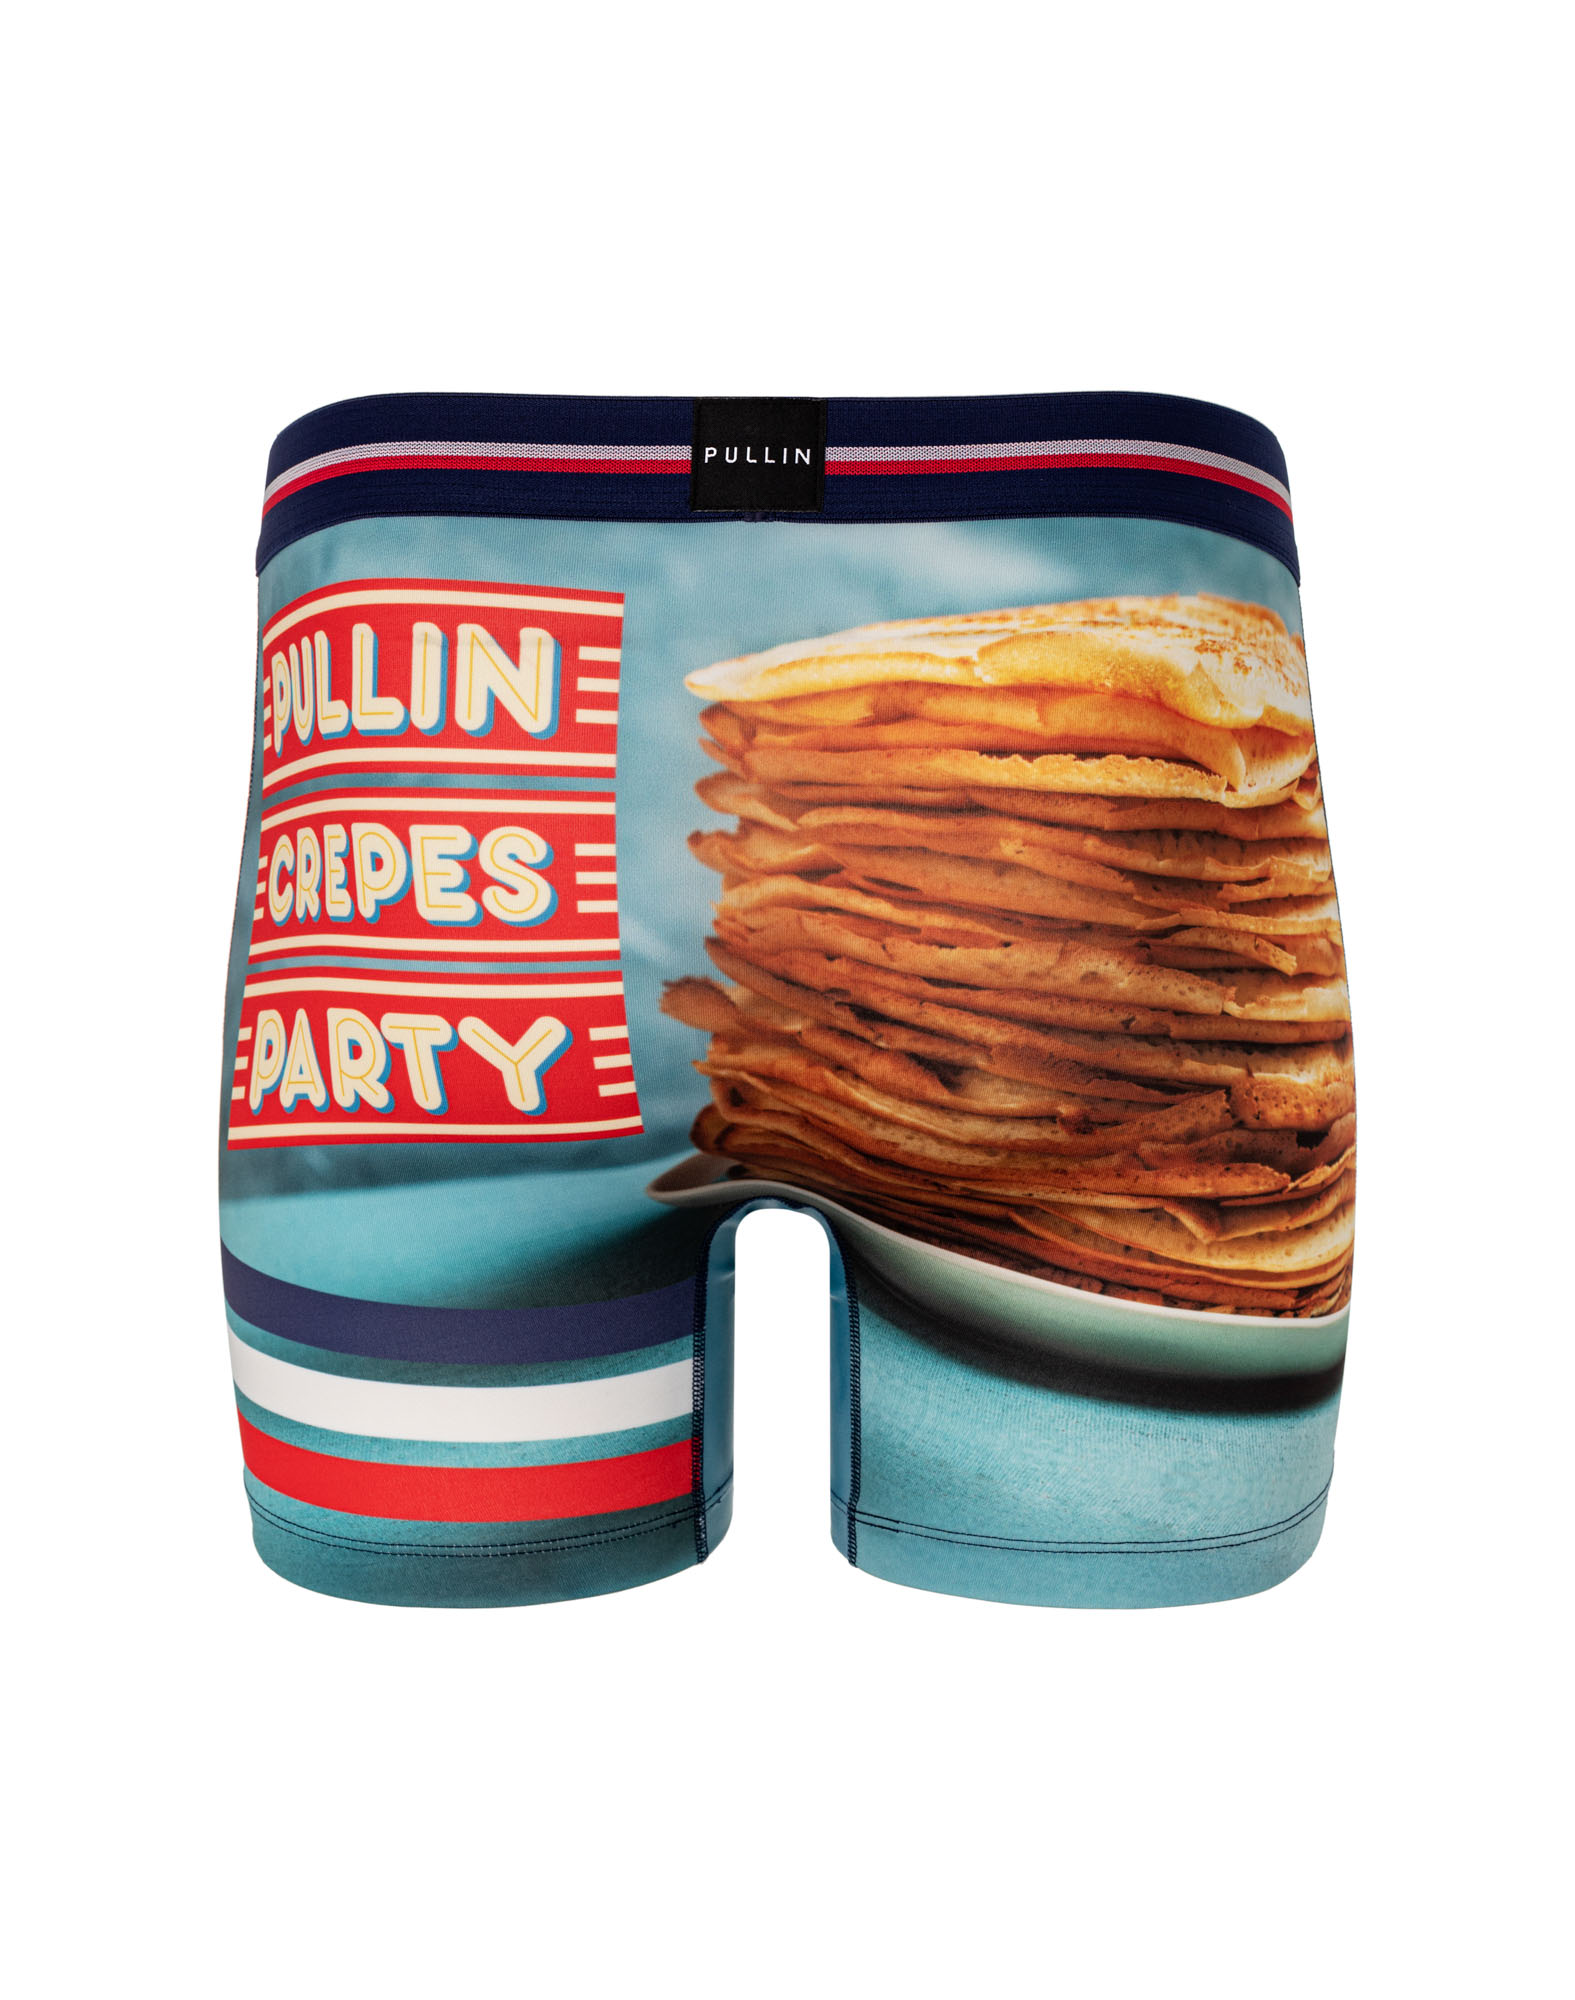 Men's trunk FASHION 2 CREPESPARTY